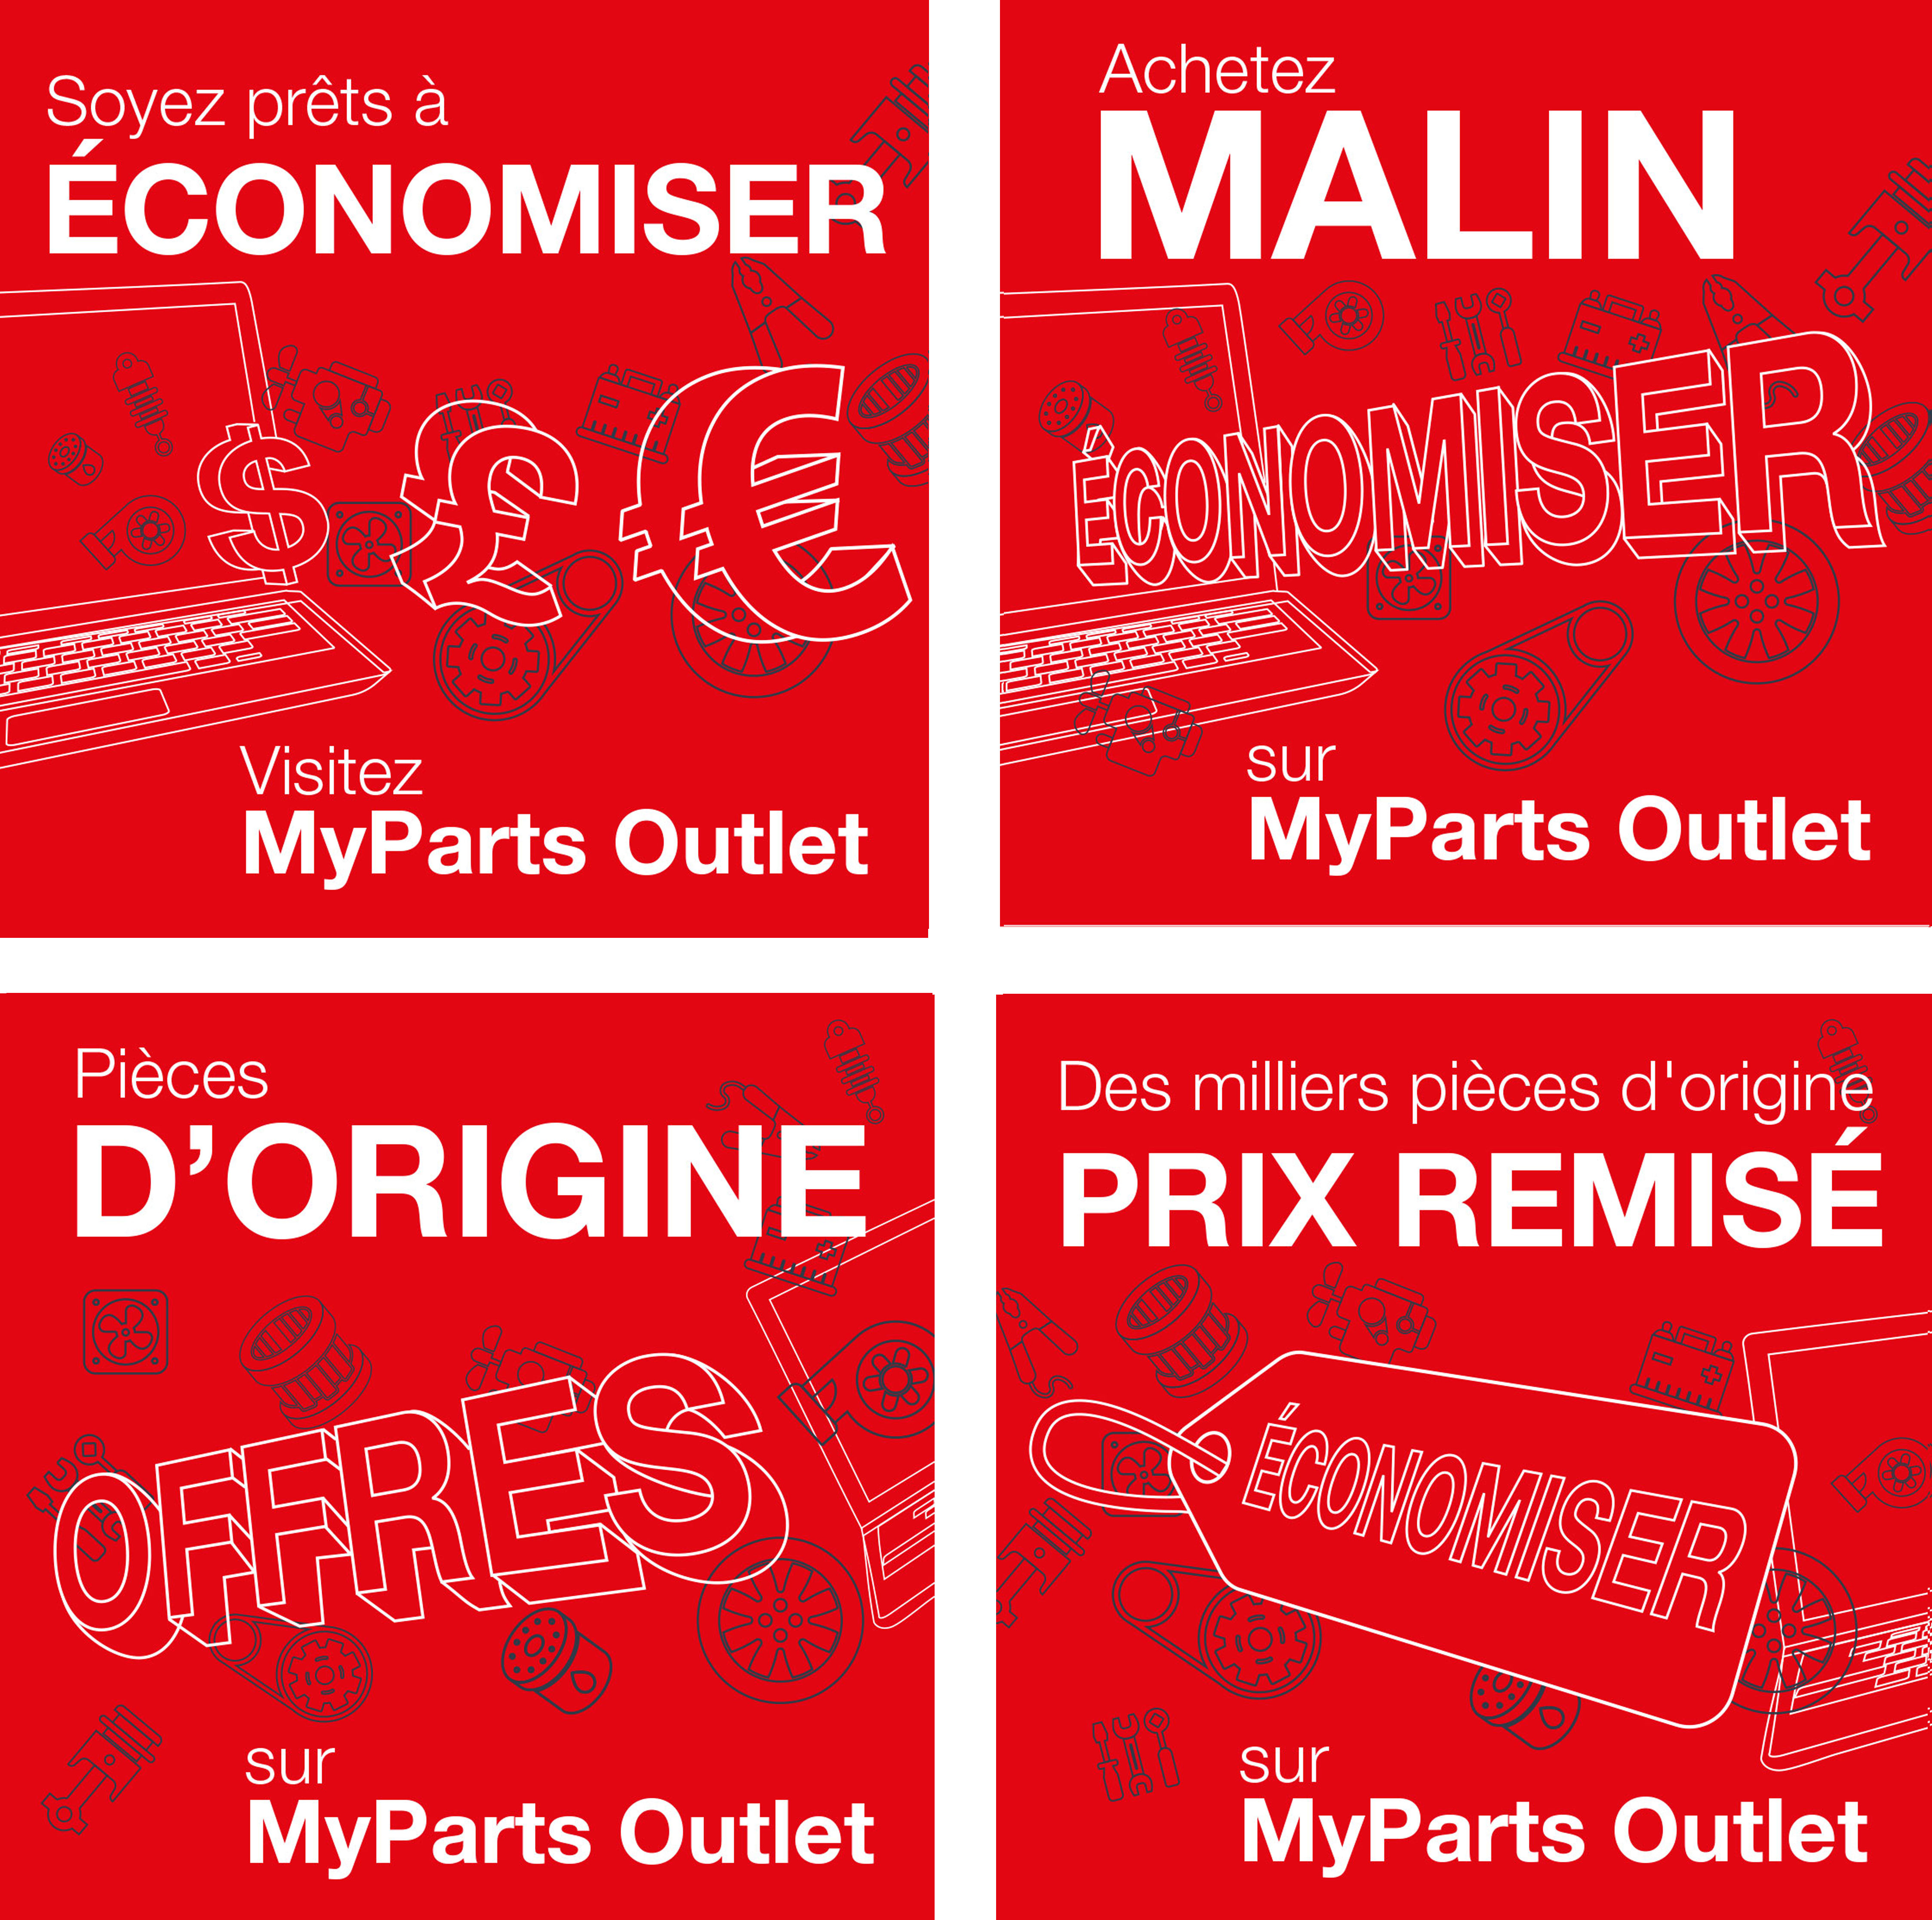 MyParts-Outlet-banners-combo-FR.jpg